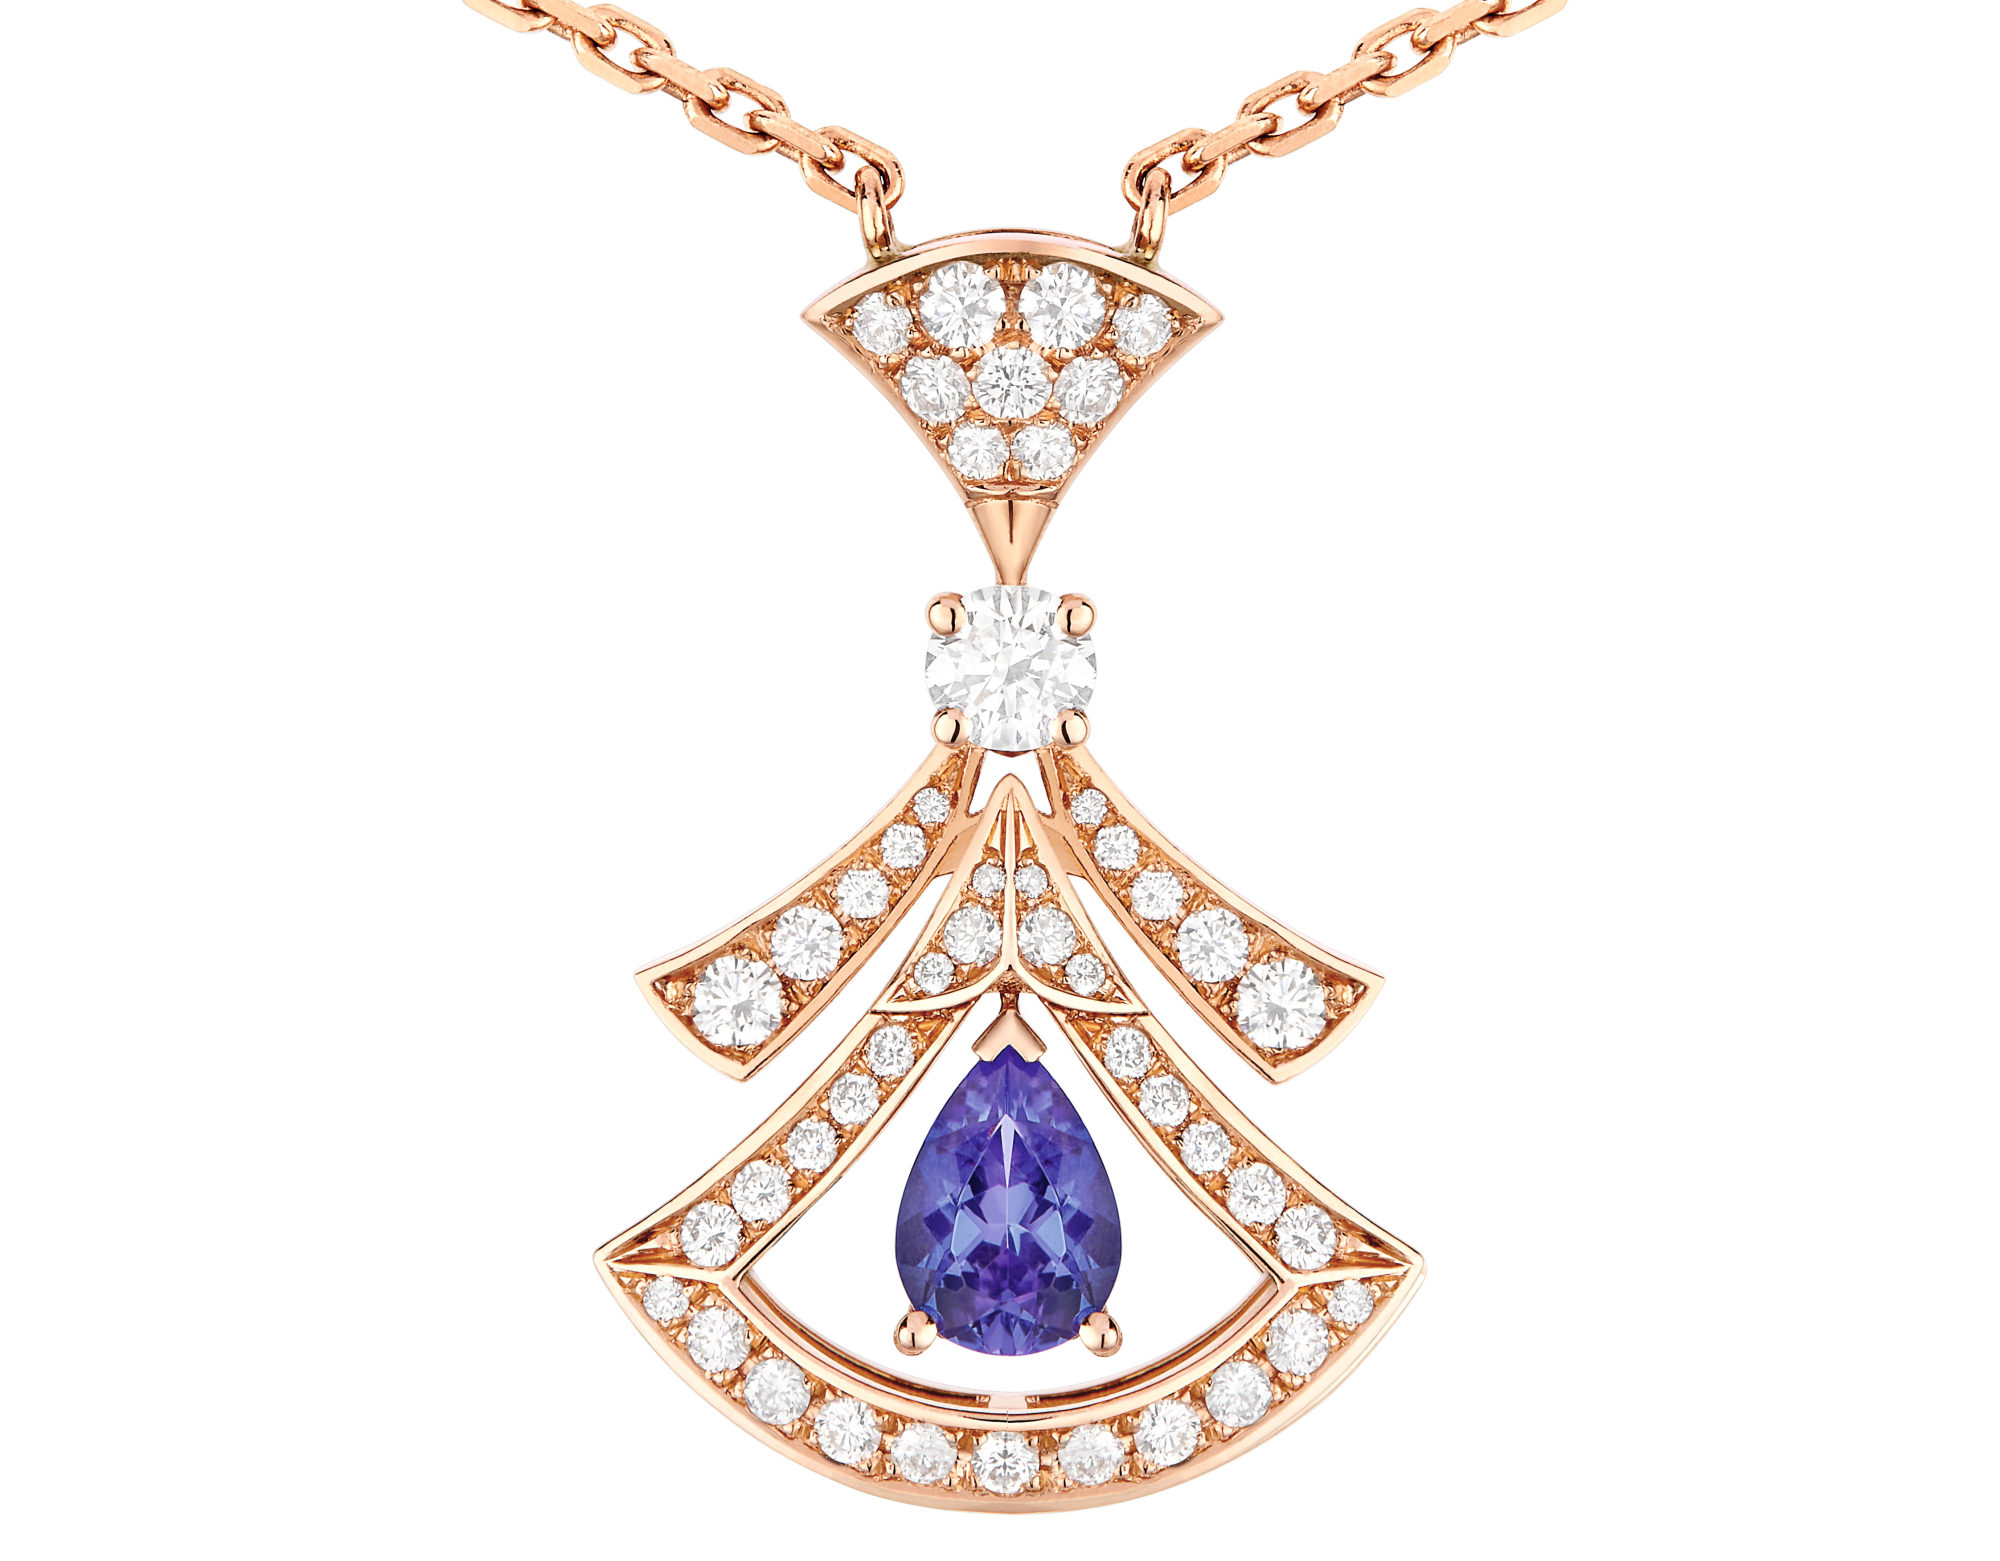 Style Edit: Bulgari’s Diva Dreams jewellery collection – shown off by ...